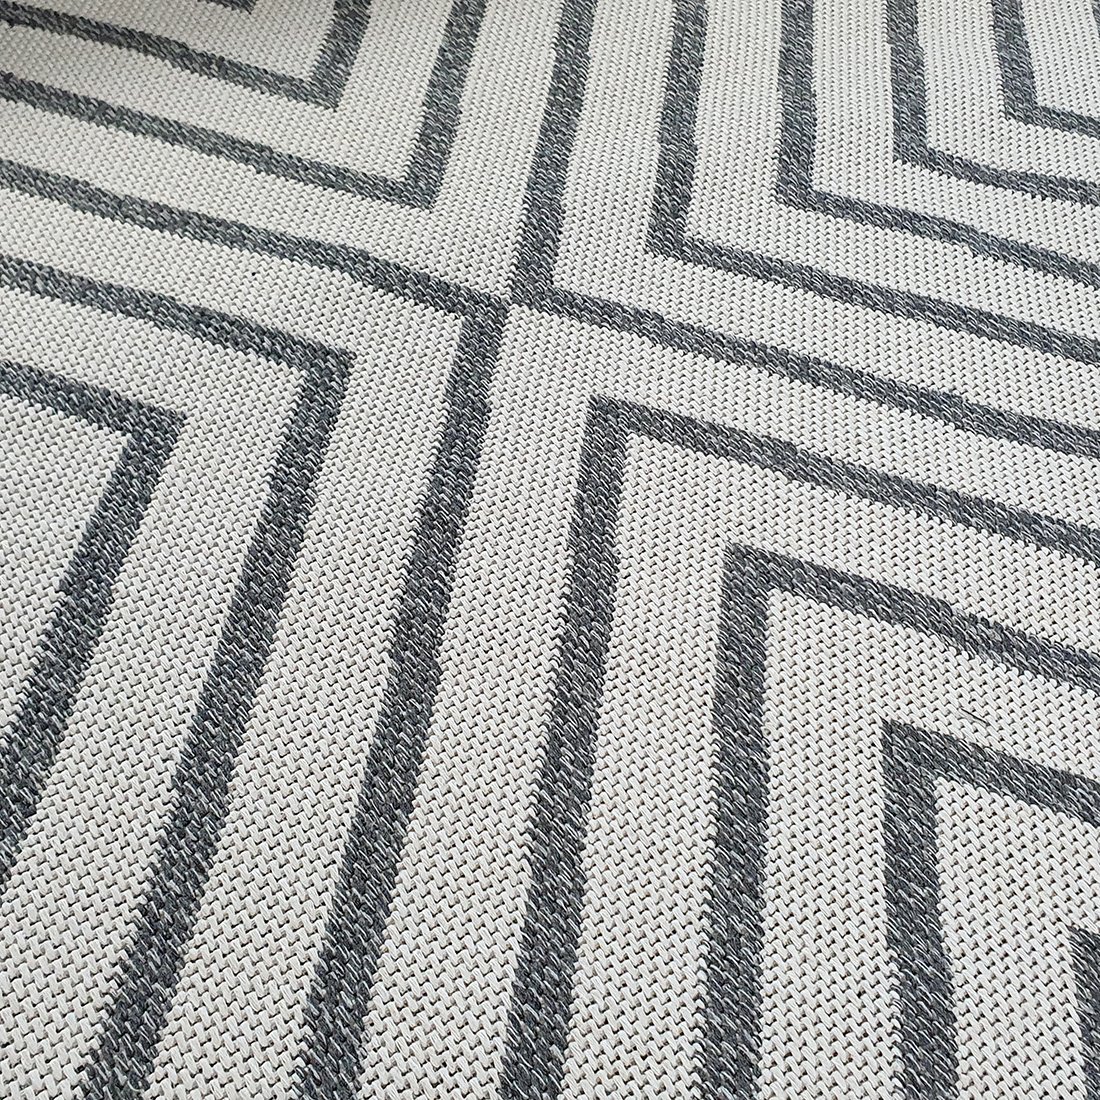 Cotton Rug Cream Grey Geometric | Rugs Dropshipping, Wholesale of Rugs ...